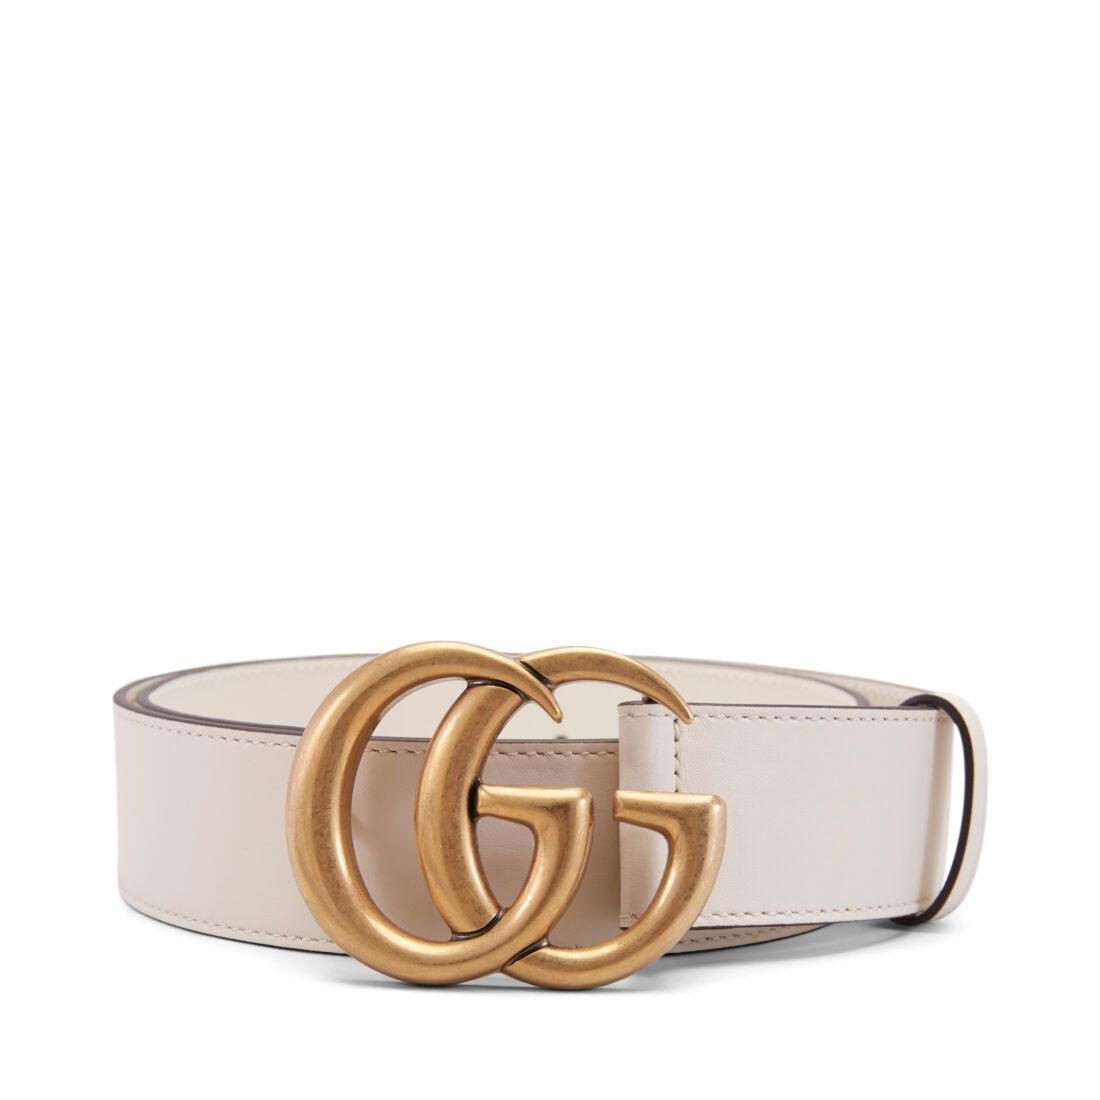 How Much Does a Gucci Belt Cost